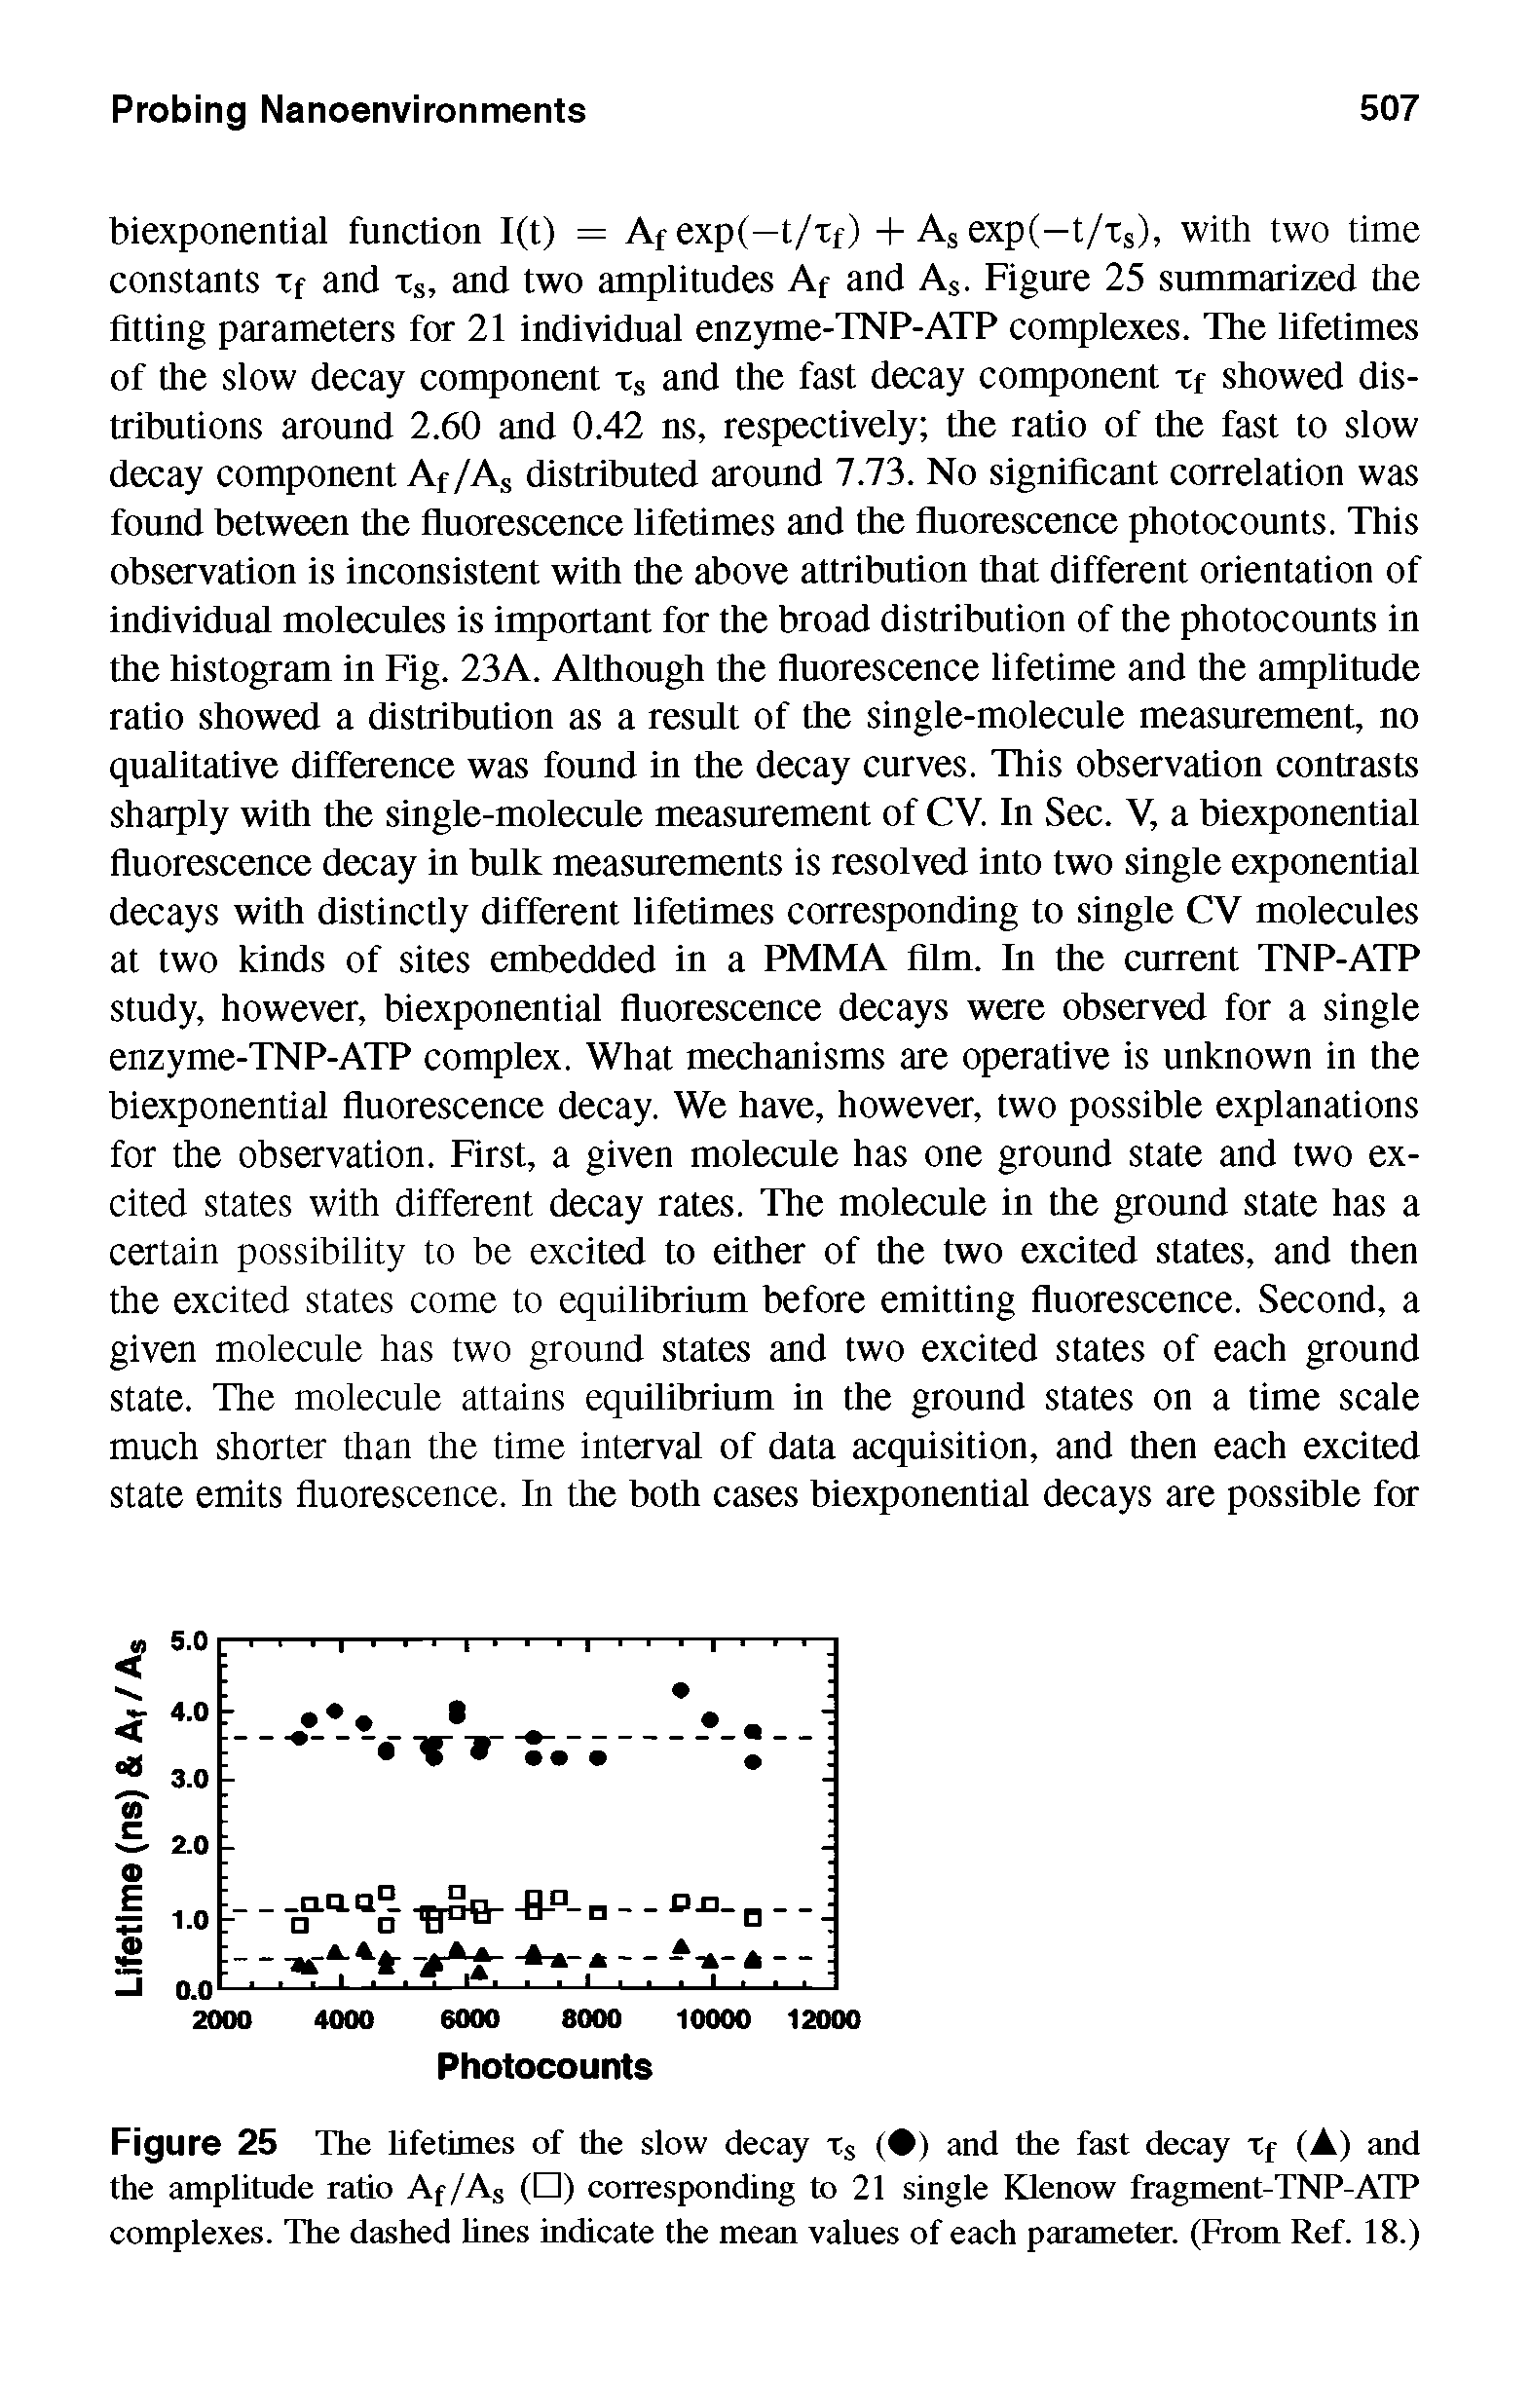 Figure 25 The lifetimes of the slow decay xs ( ) and the fast decay Tf (A) and the amplitude ratio Af/As ( ) corresponding to 21 single Klenow fragment-TNP-ATP complexes. The dashed lines indicate the mean values of each parameter. (From Ref. 18.)...